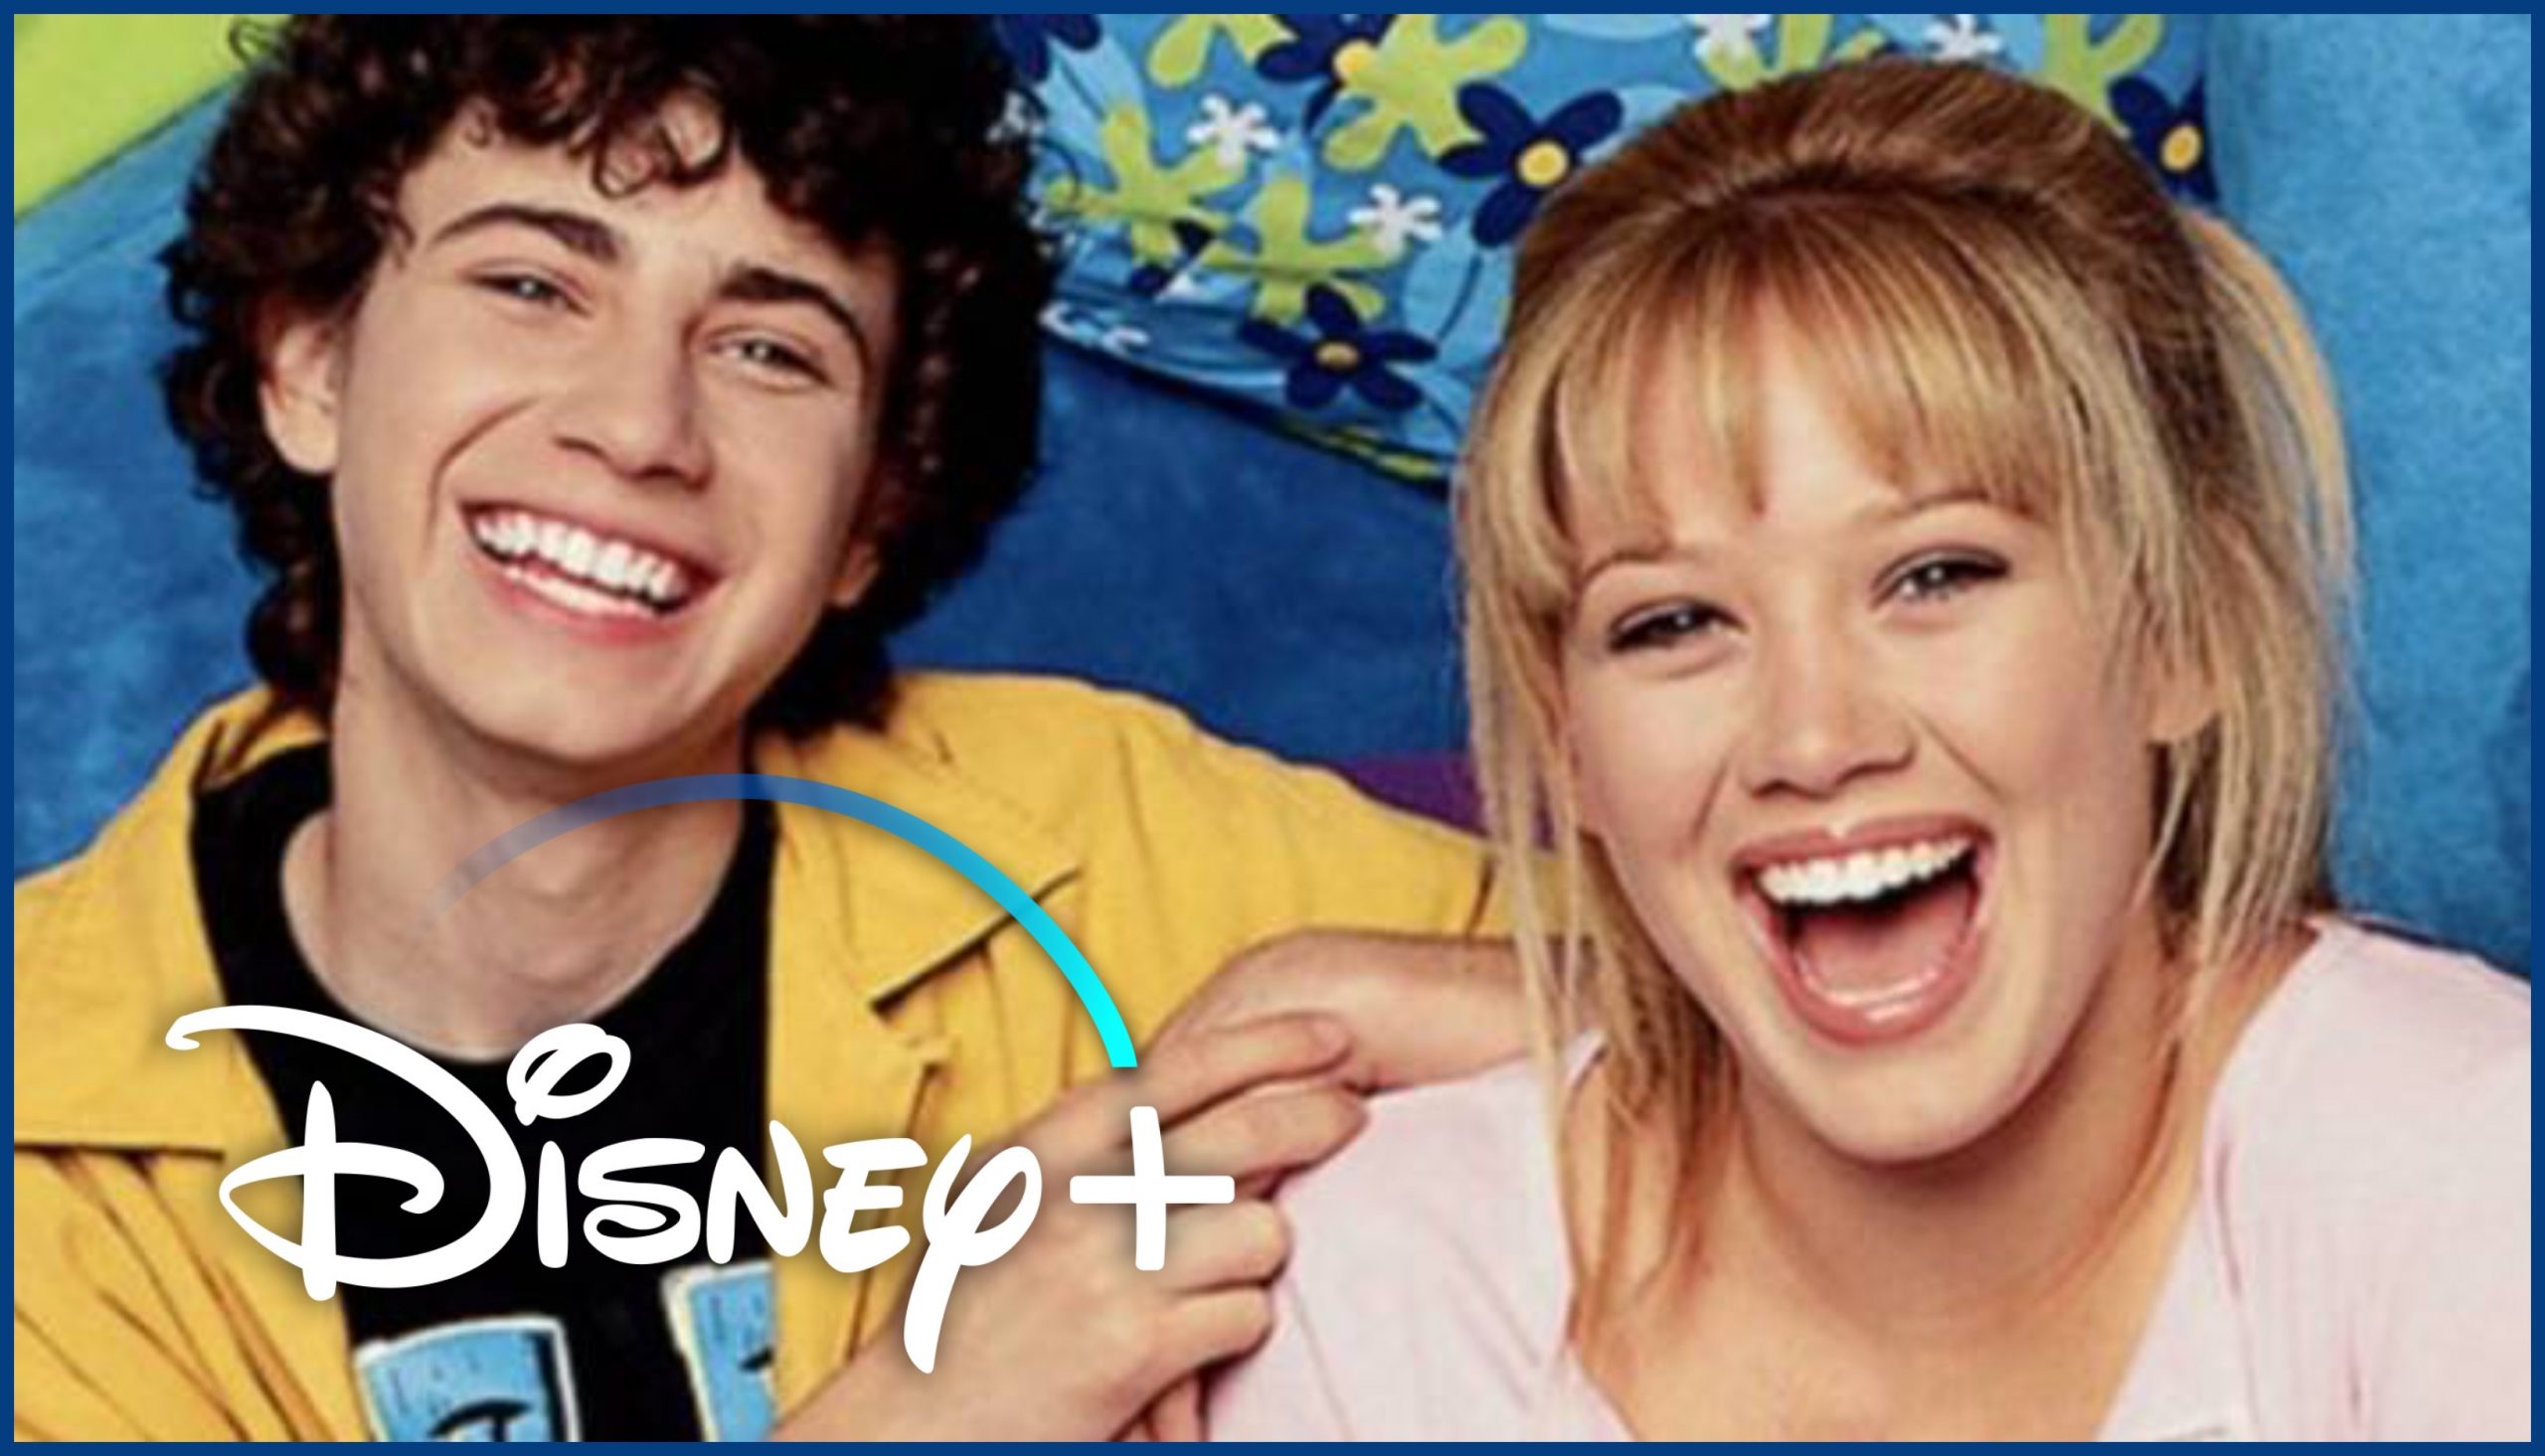 Hilary Duff Shares Update on the Disney+ ‘Lizzie McGuire’ Reboot